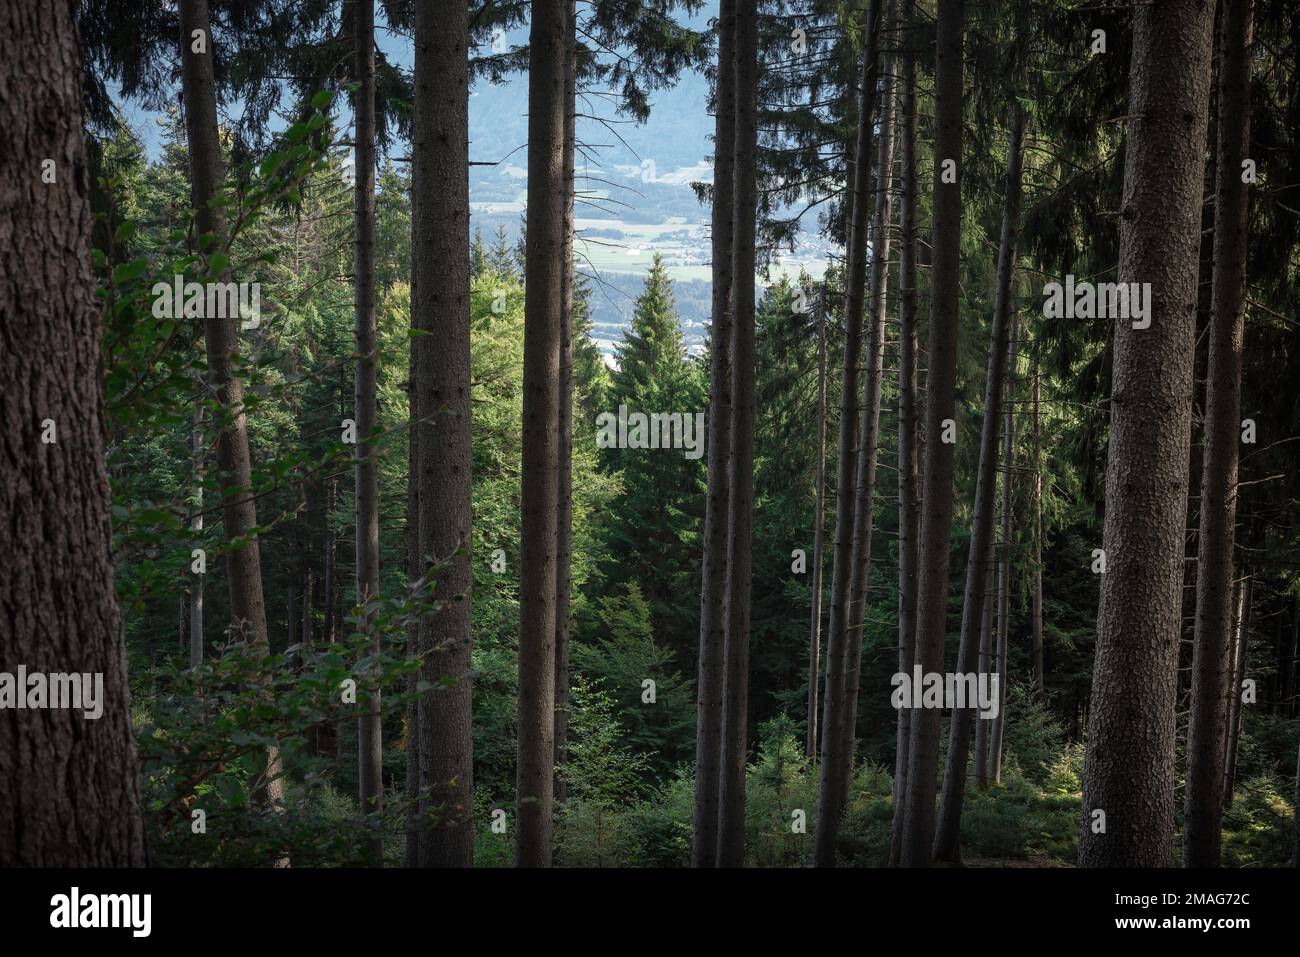 Forest trees, view through a dense forest of pine trees towards distant farmland in the Inn valley near Innsbruck, Austria Stock Photo